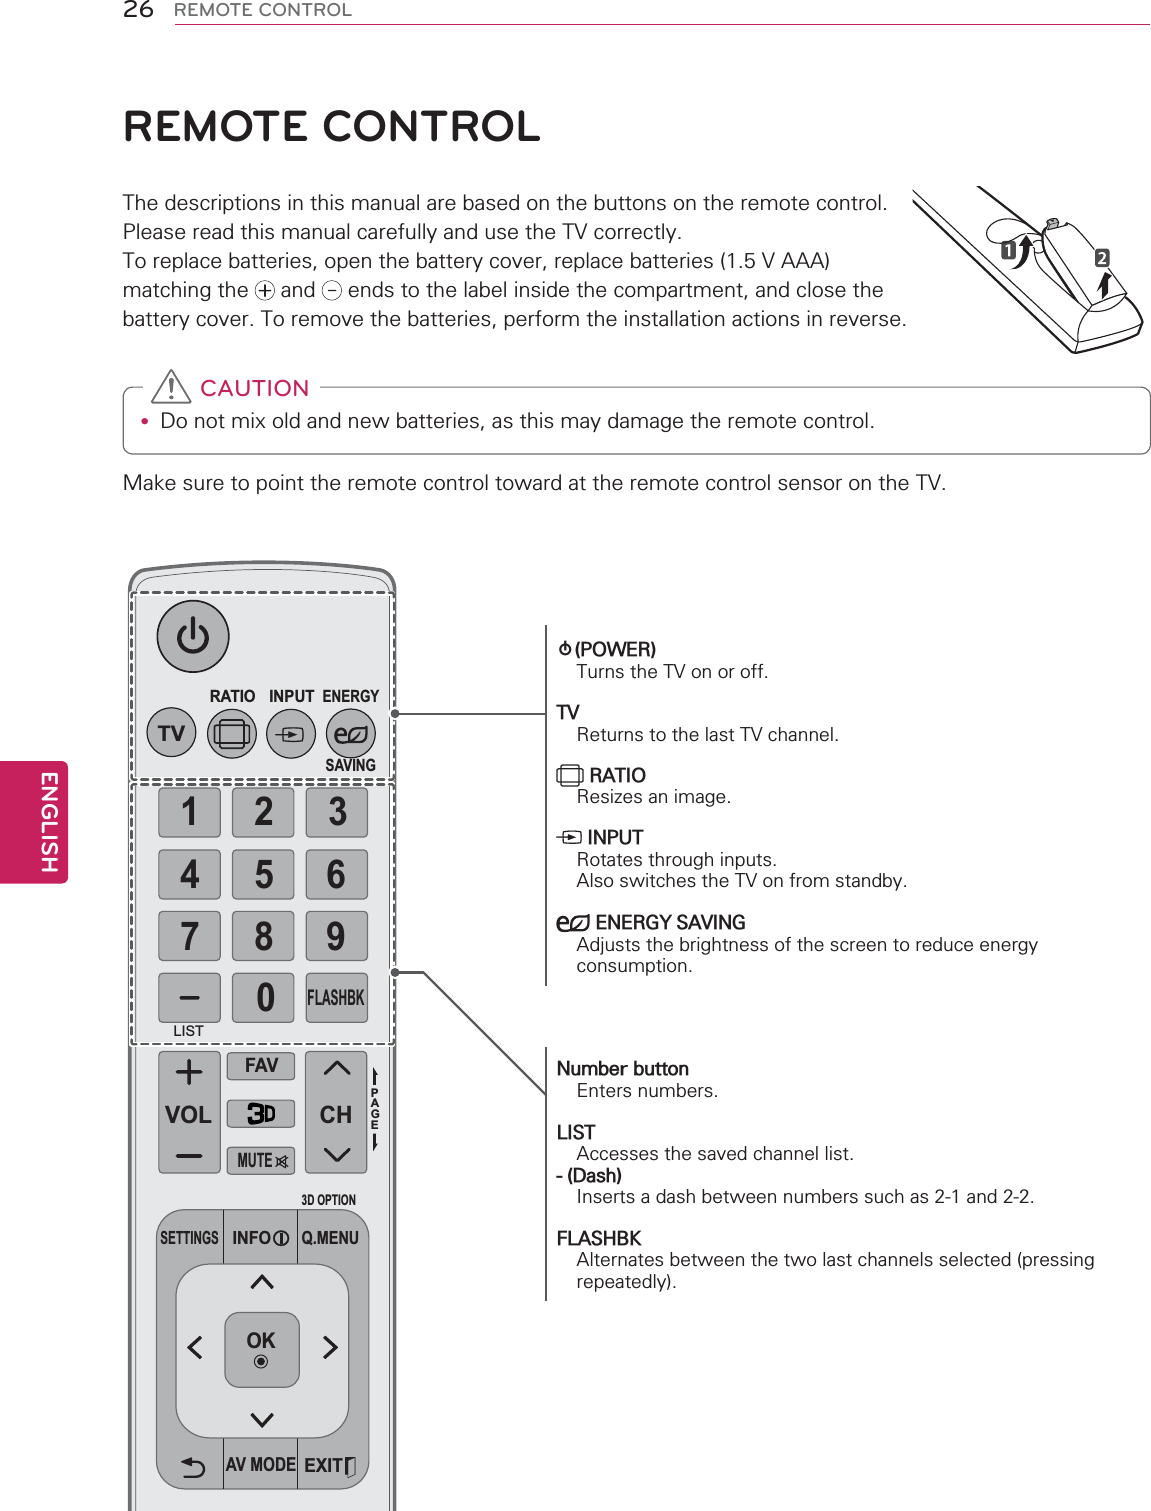 ENGLISH26 REMOTE CONTROLREMOTE CONTROLThe descriptions in this manual are based on the buttons on the remote control. Please read this manual carefully and use the TV correctly.To replace batteries, open the battery cover, replace batteries (1.5 V AAA) matching the   and   ends to the label inside the compartment, and close the battery cover. To remove the batteries, perform the installation actions in reverse.y Do not mix old and new batteries, as this may damage the remote control. CAUTIONMake sure to point the remote control toward at the remote control sensor on the TV.CHVOL1234567809PAGETVRATIO INPUTFAVMUTELISTENERGYSAVINGFLASHBKEXITOK3D OPTIONQ.MENUSETTINGSAV MODEINFO(POWER)Turns the TV on or off.TVReturns to the last TV channel. RATIOResizes an image. INPUTRotates through inputs. Also switches the TV on from standby. ENERGY SAVINGAdjusts the brightness of the screen to reduce energy consumption.Number buttonEnters numbers.LISTAccesses the saved channel list.- (Dash) Inserts a dash between numbers such as 2-1 and 2-2.FLASHBKAlternates between the two last channels selected (pressing repeatedly).